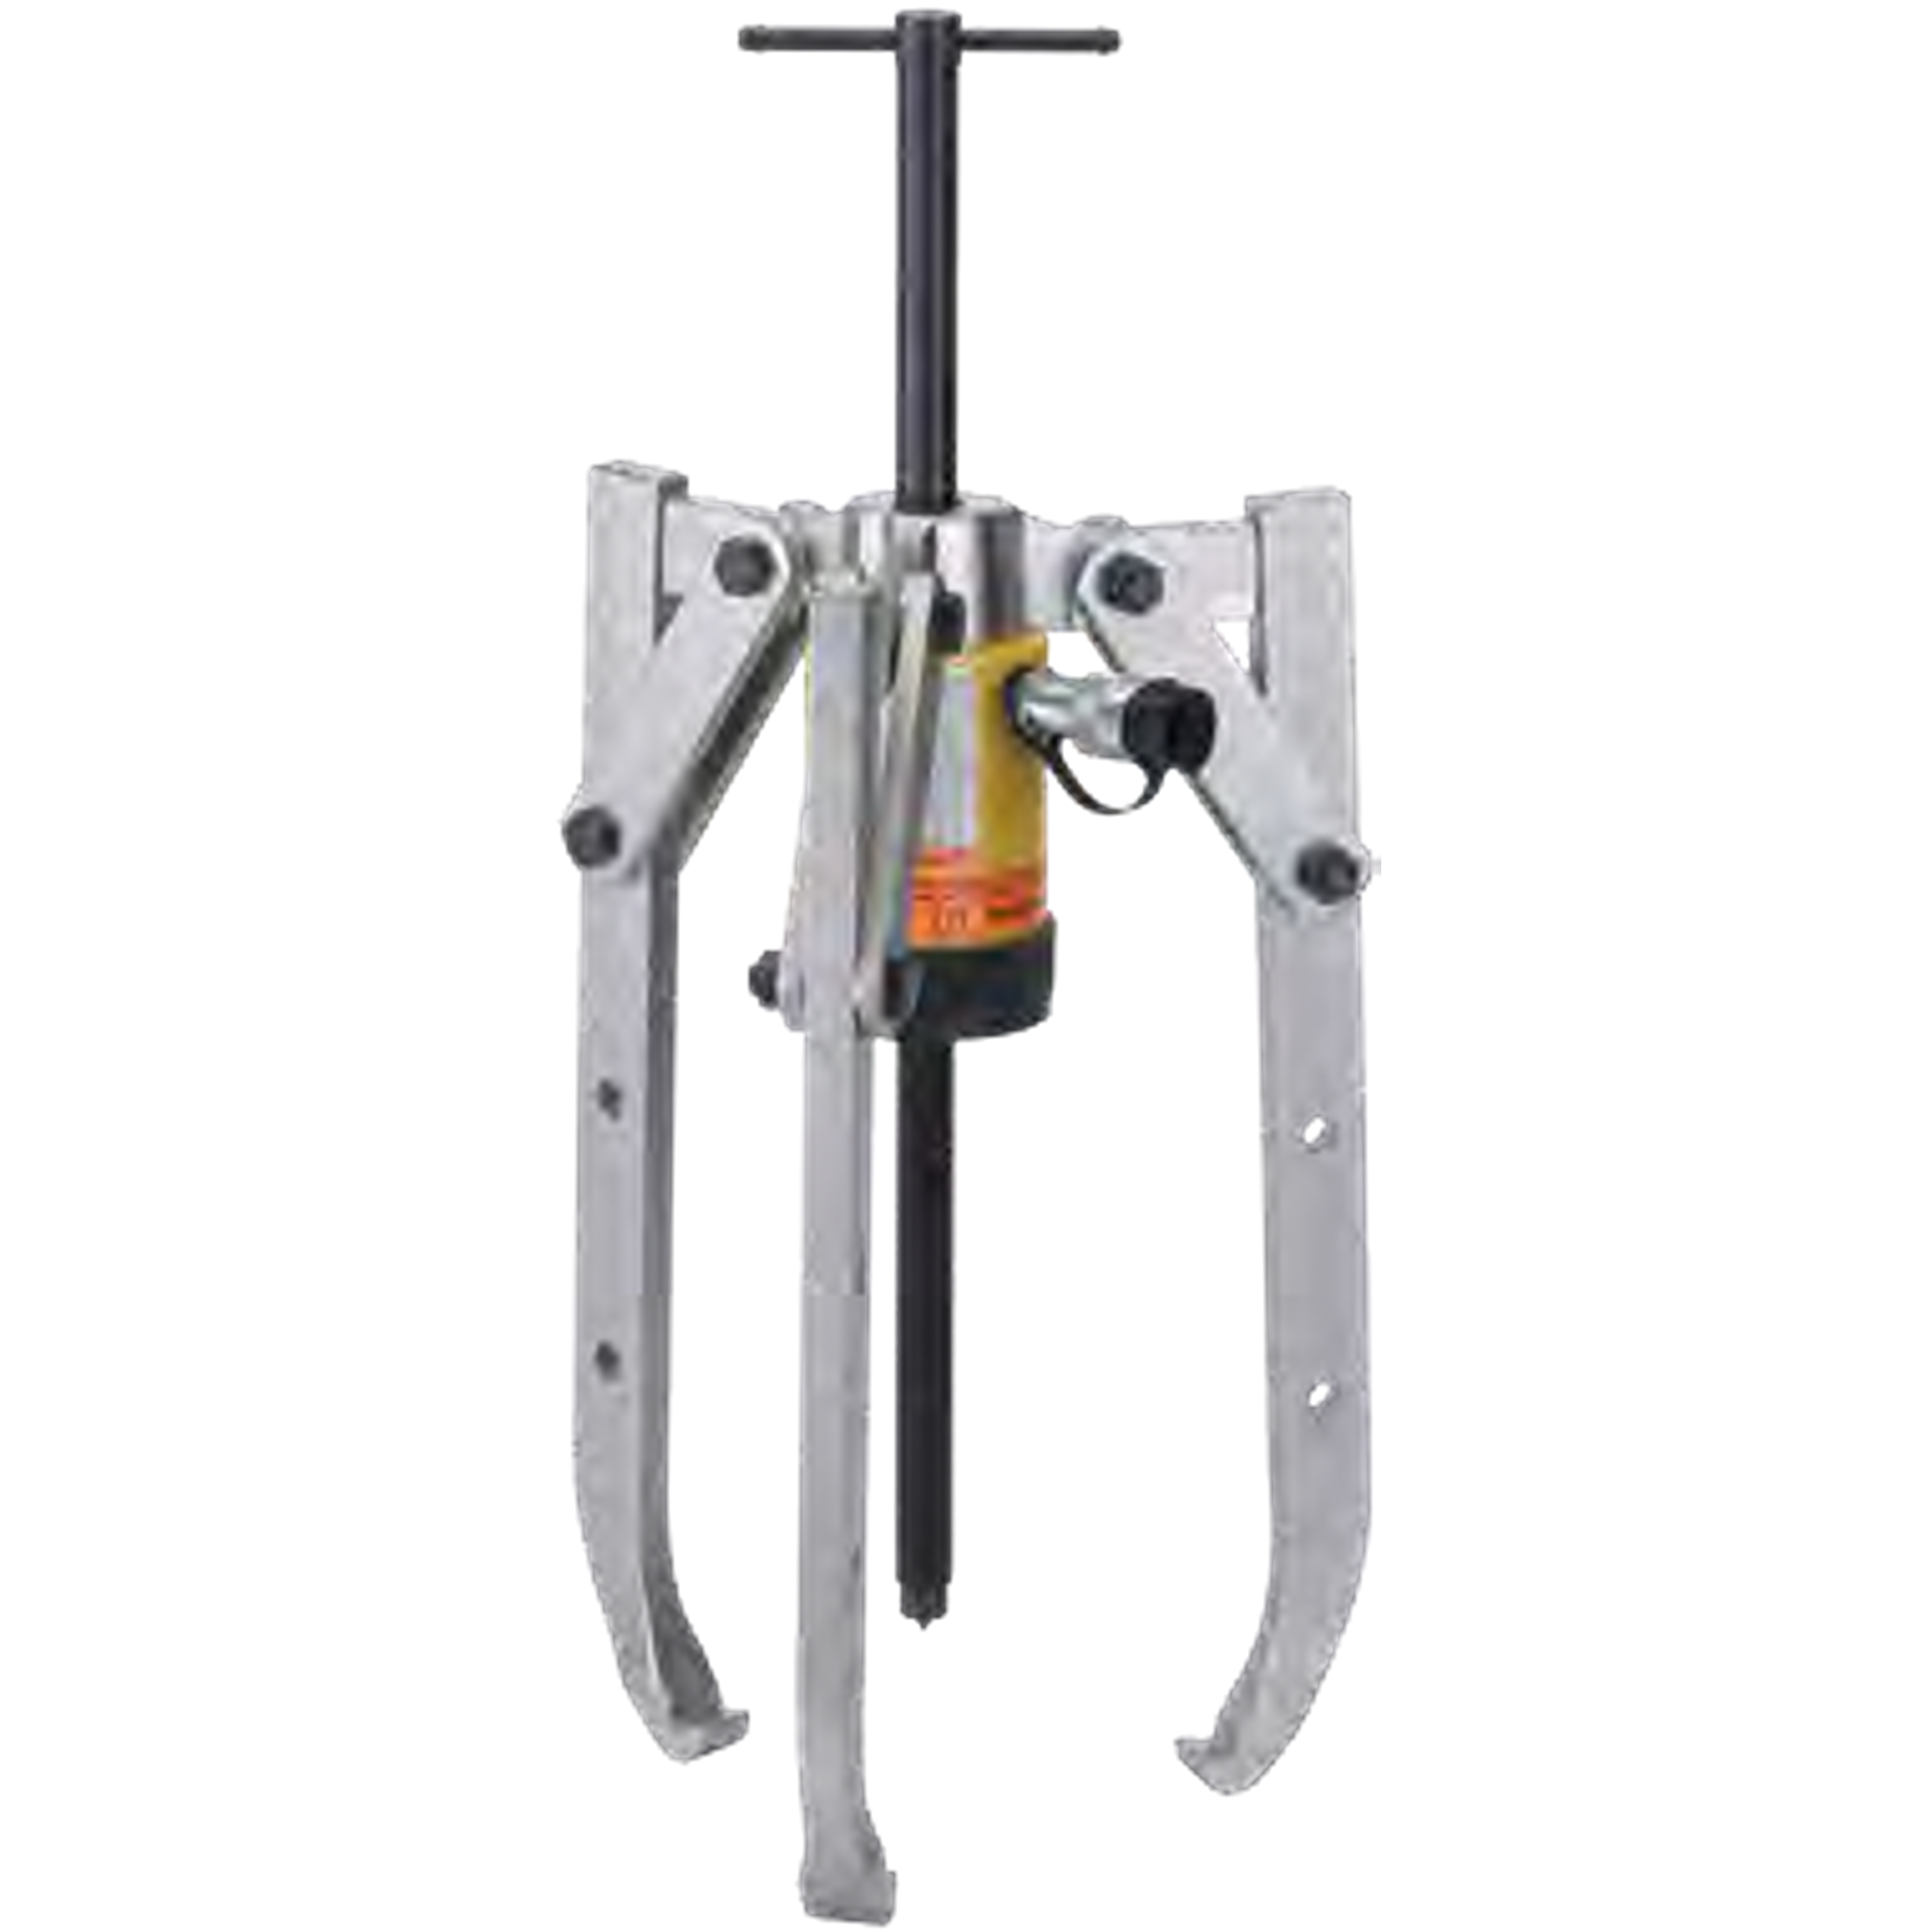 NEXUS HY136 3-Arm Hydraulic Puller Max. Pressure Of Up To 50 t - Premium 3-Arm Hydraulic Puller from NEXUS - Shop now at Yew Aik.